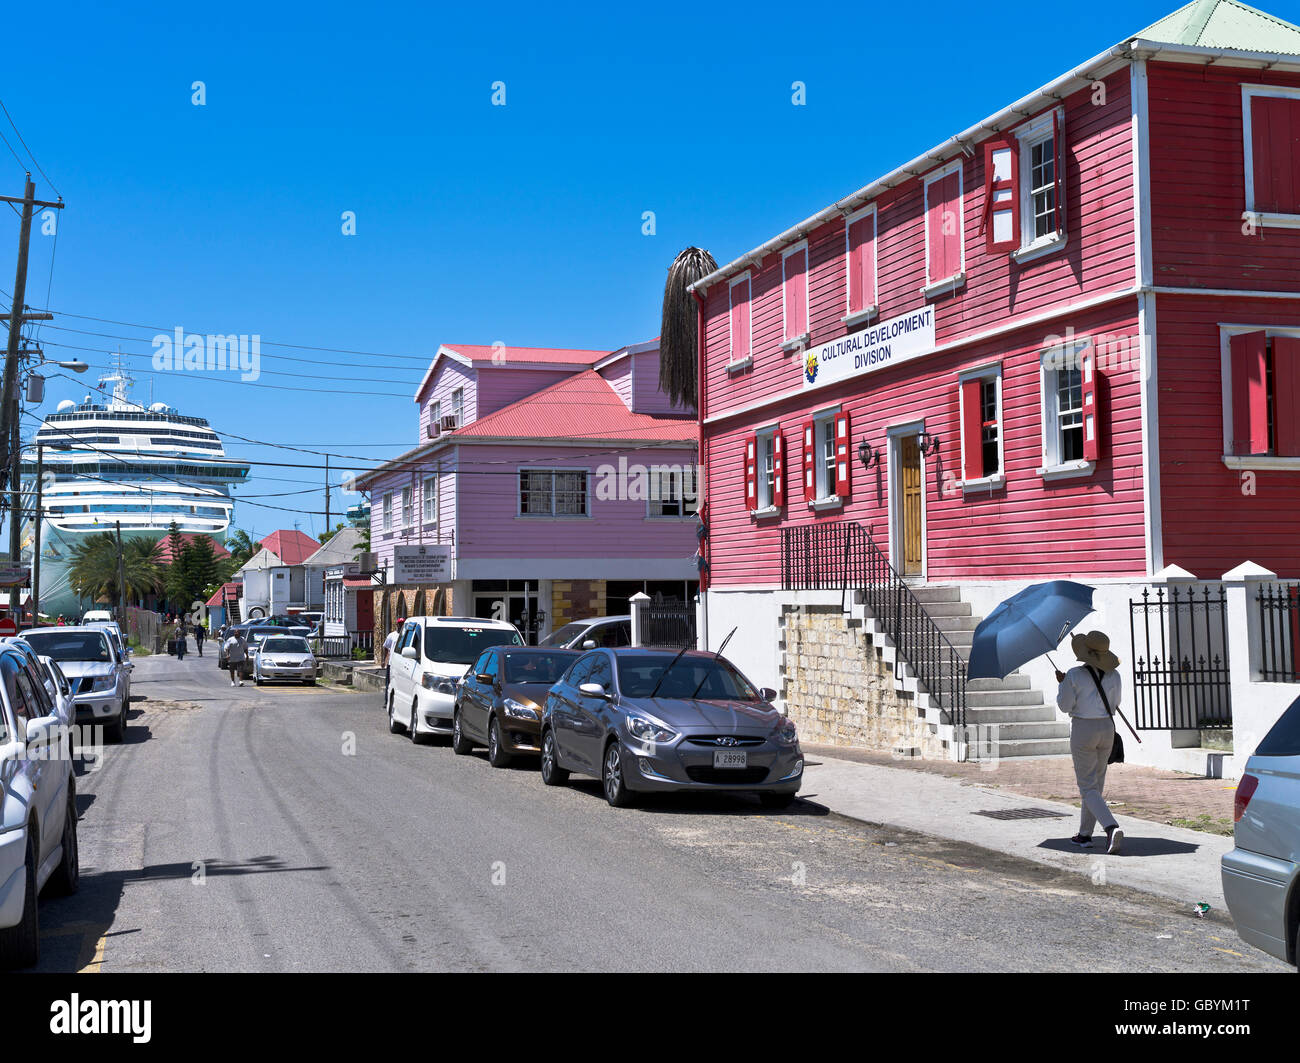 dh St Johns ANTIGUA CARIBBEAN Nevis Street and cruise liner ship at end of road colonial street town Stock Photo